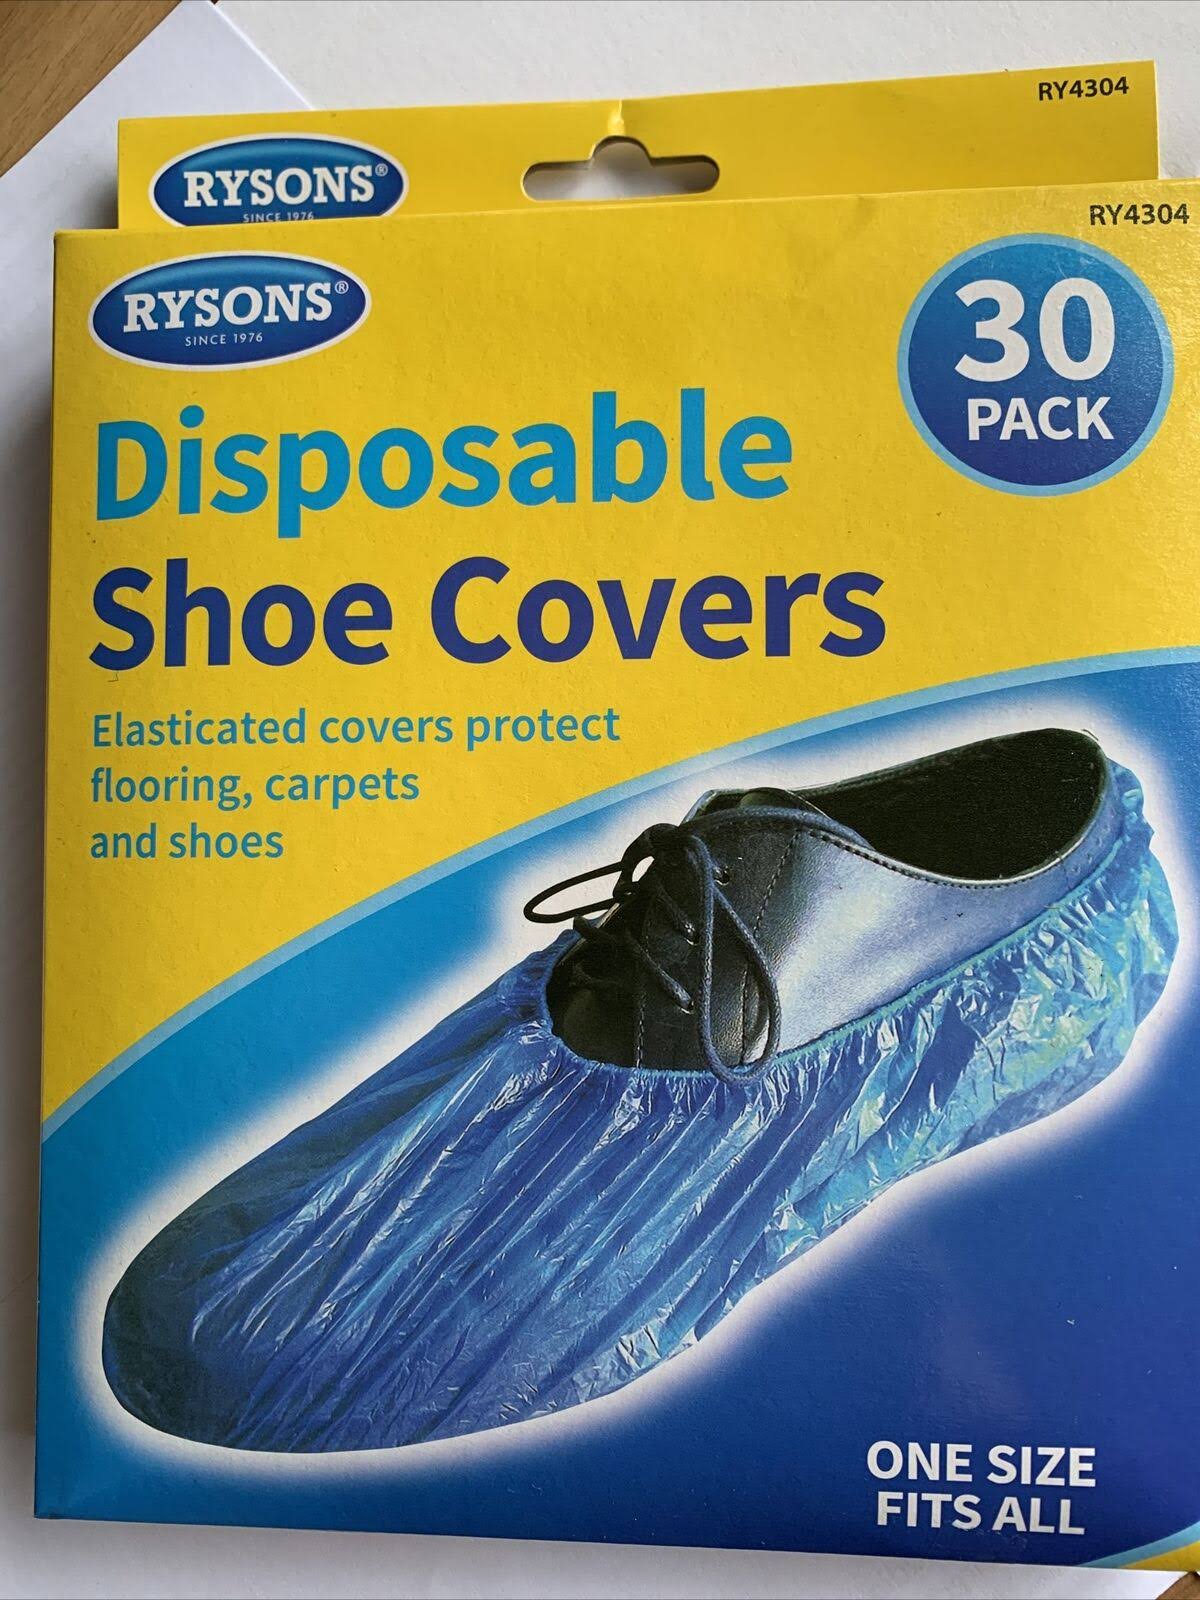 Rysons Disposable Plastic Shoe Covers 30 Pack Protect Carpet Flooring and Shoes